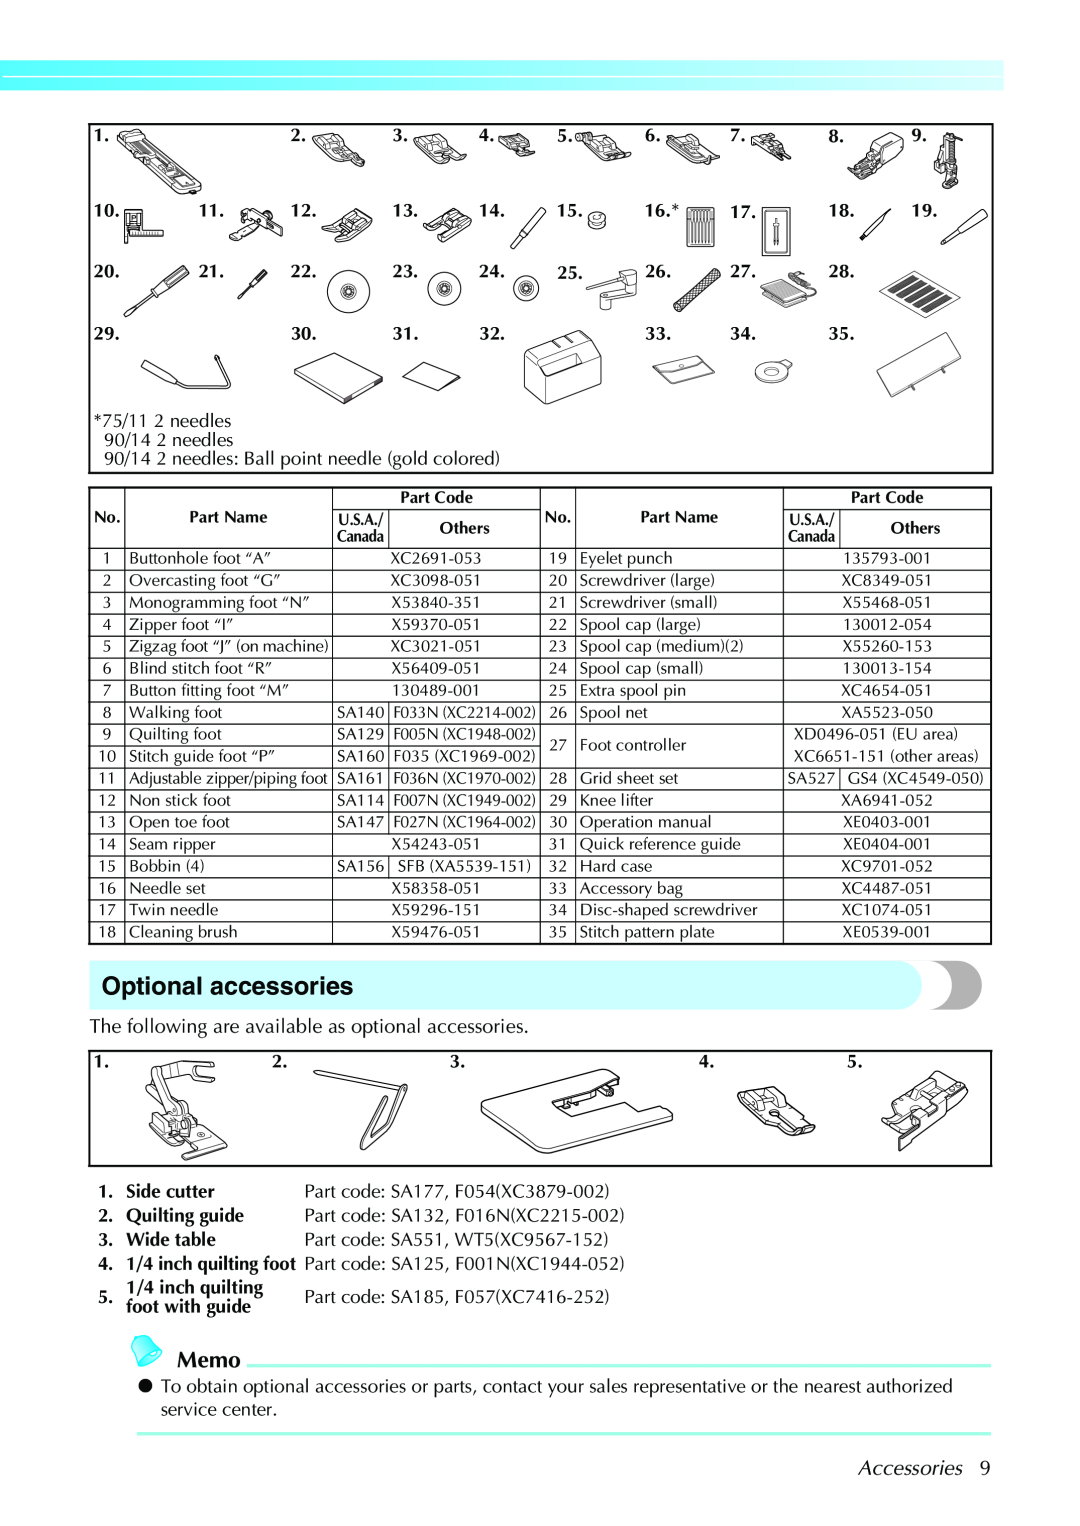 Brother NX-450 Optional accessories, Memo, The following are available as optional accessories, Accessories, Part Name 